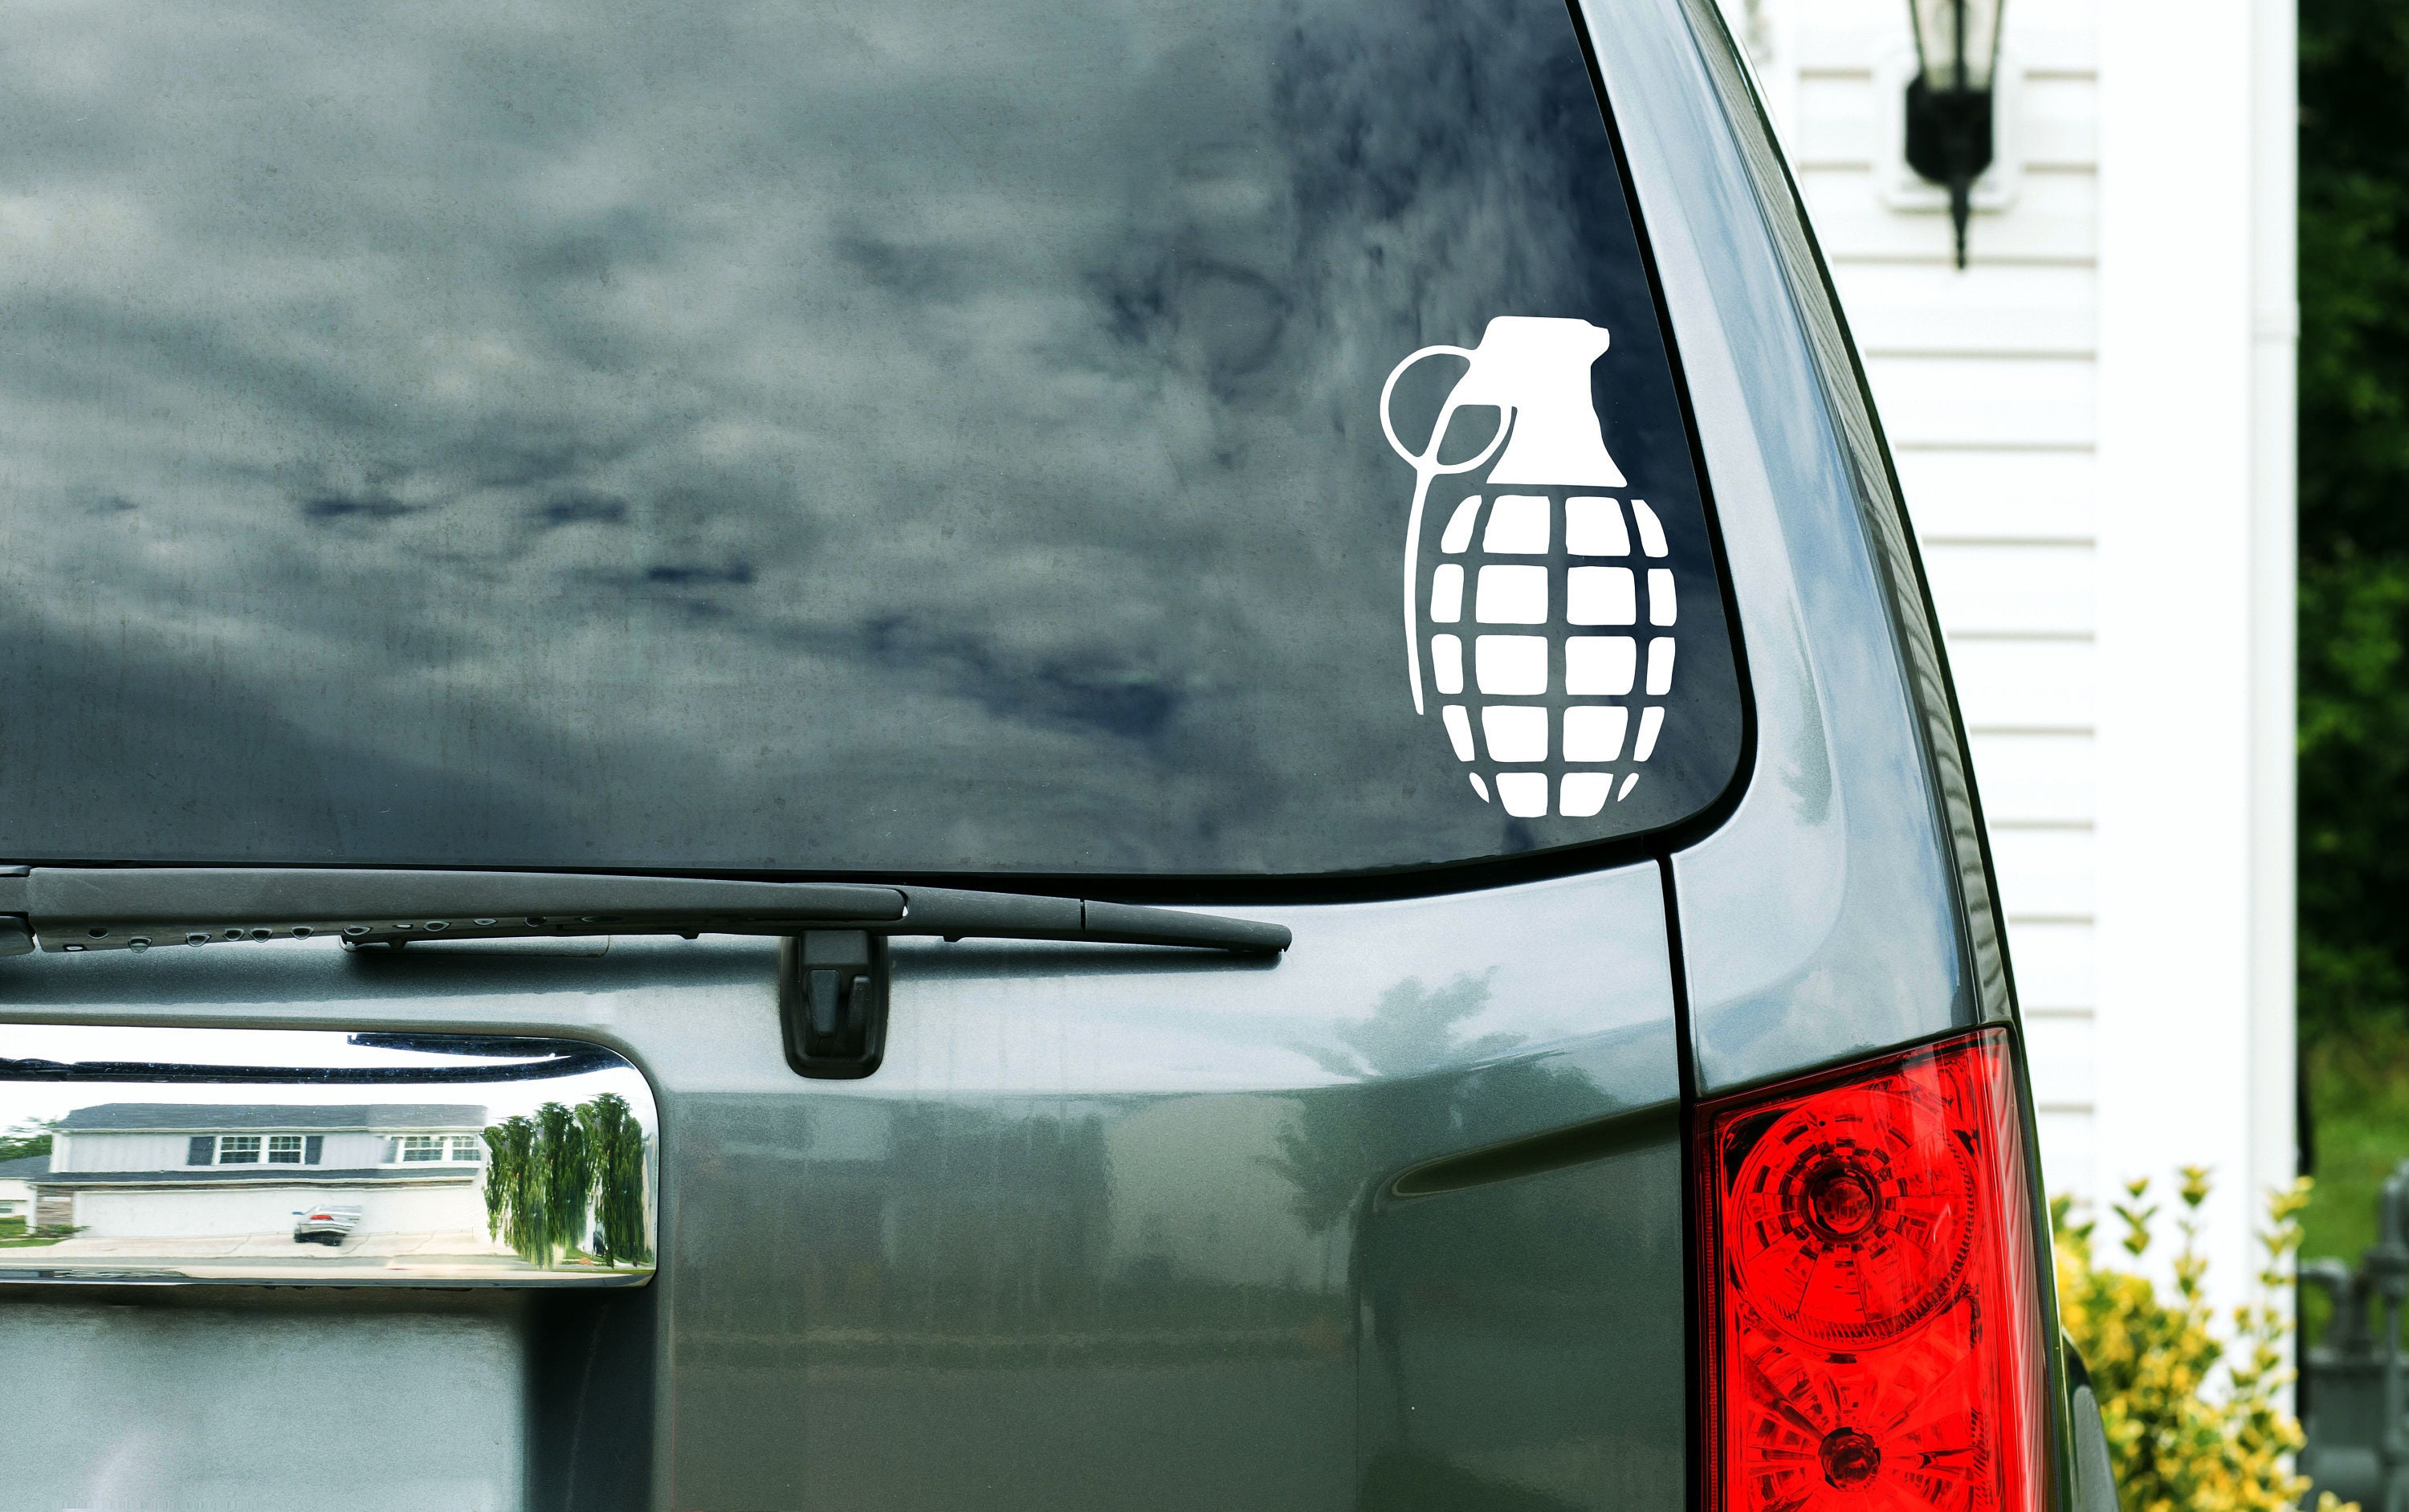 Grenade Custom Vinyl Decal Sticker Choose Your Color and - Etsy